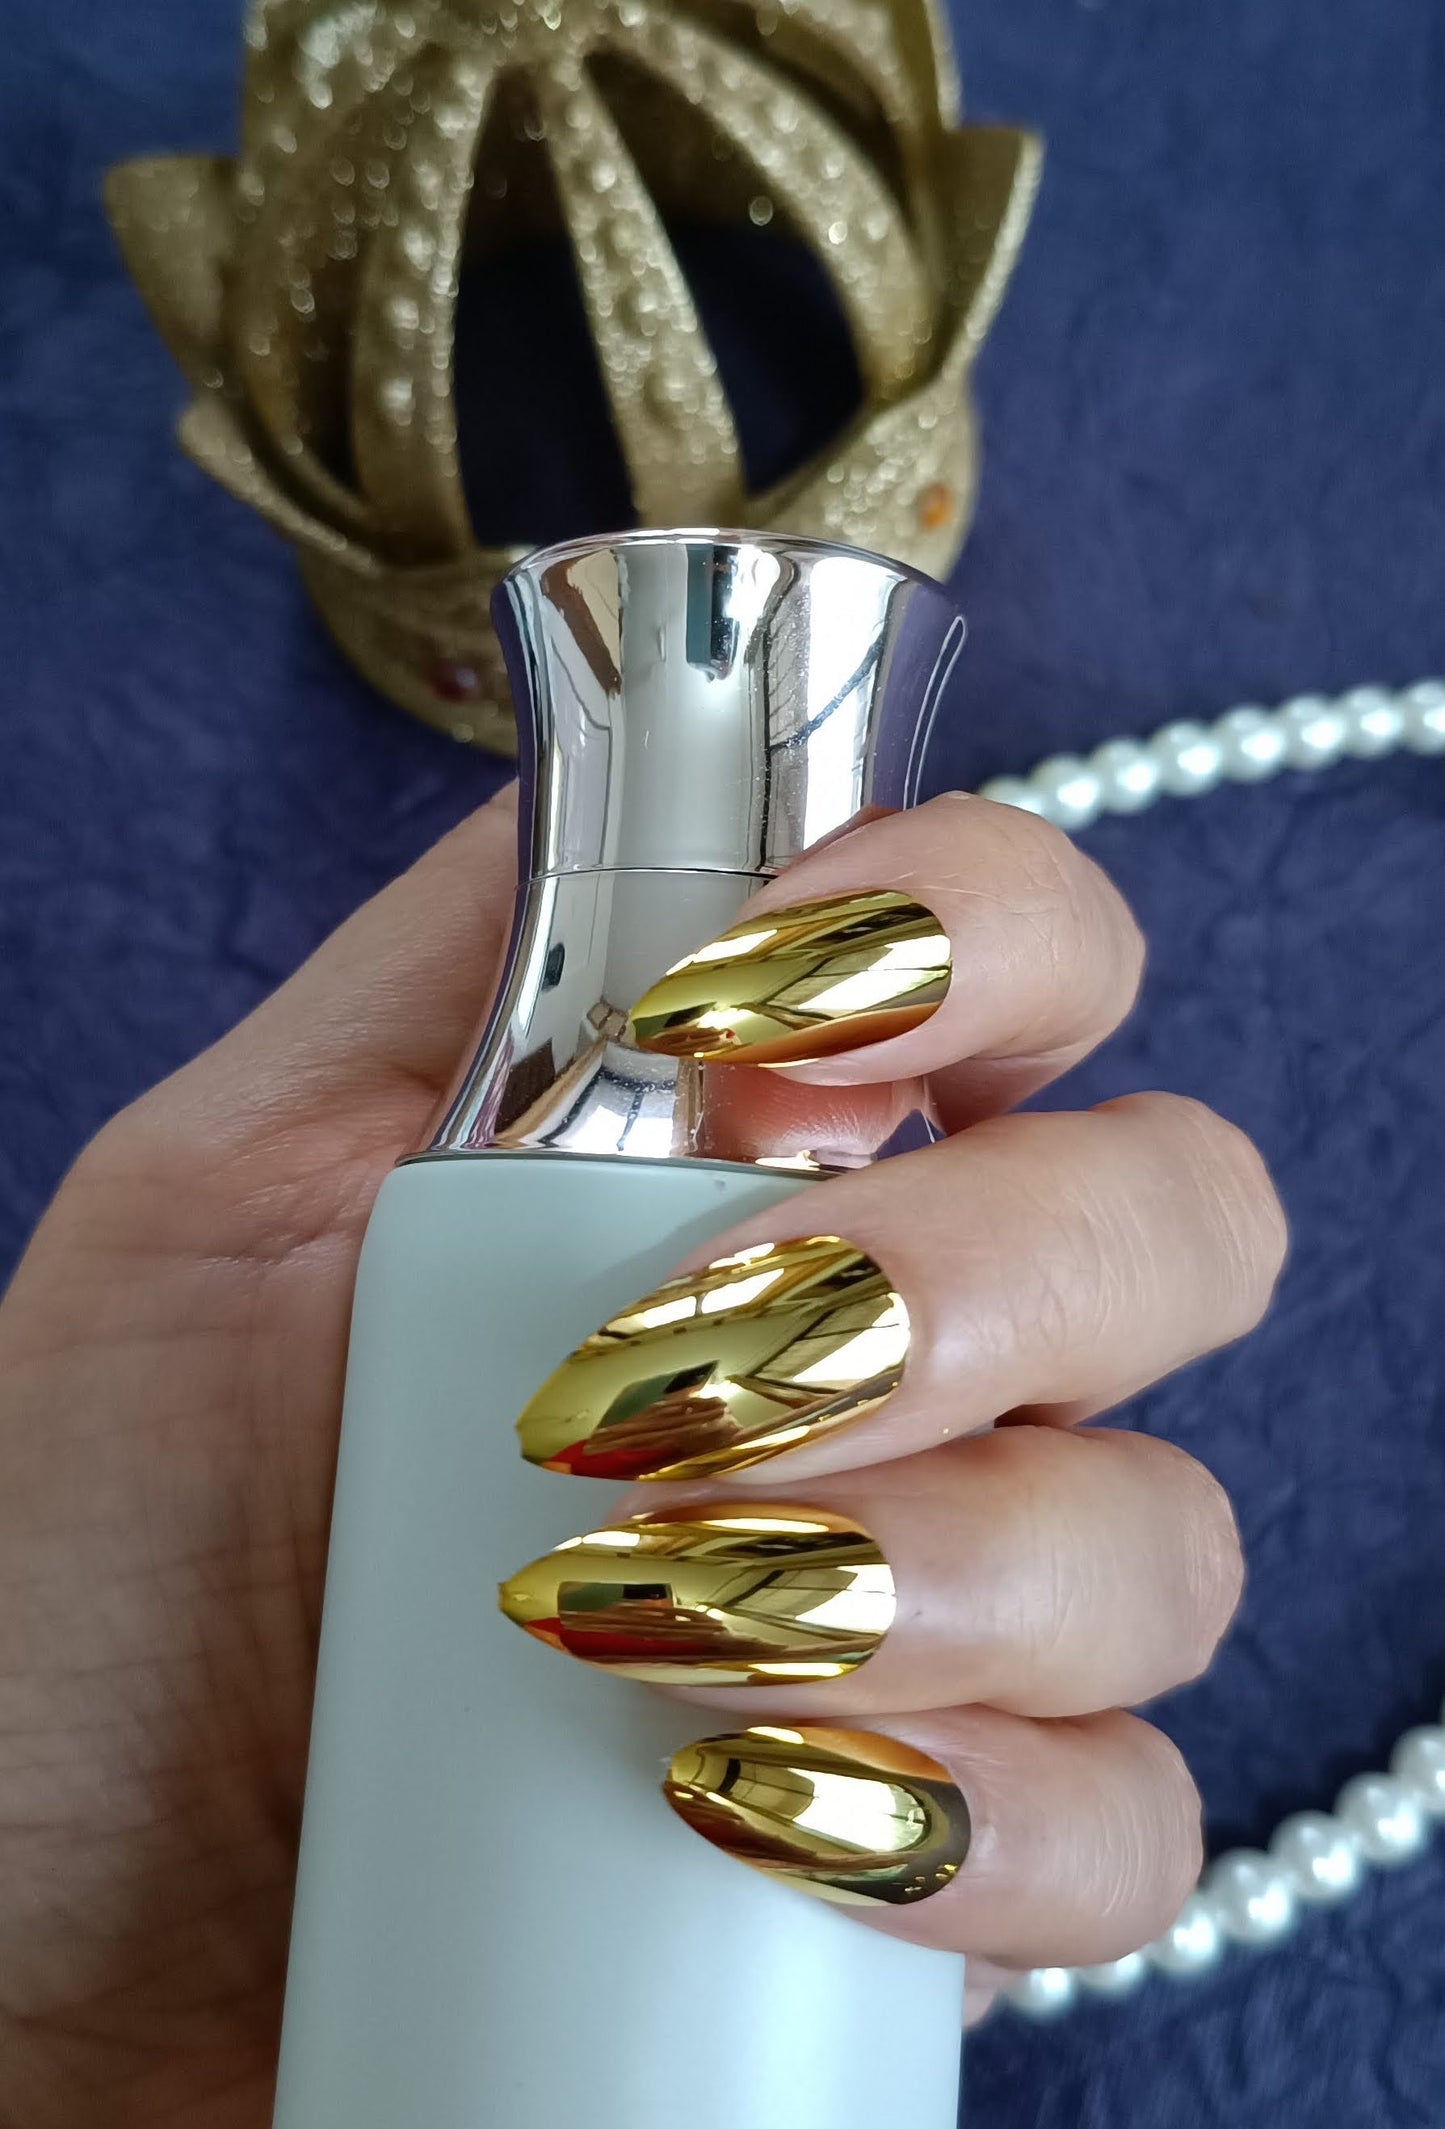 Acrylic/ Press-on Designer Nails with Glue Tabs | Artificial Nails Under 100 - Almond Shaped Golden Chromatic